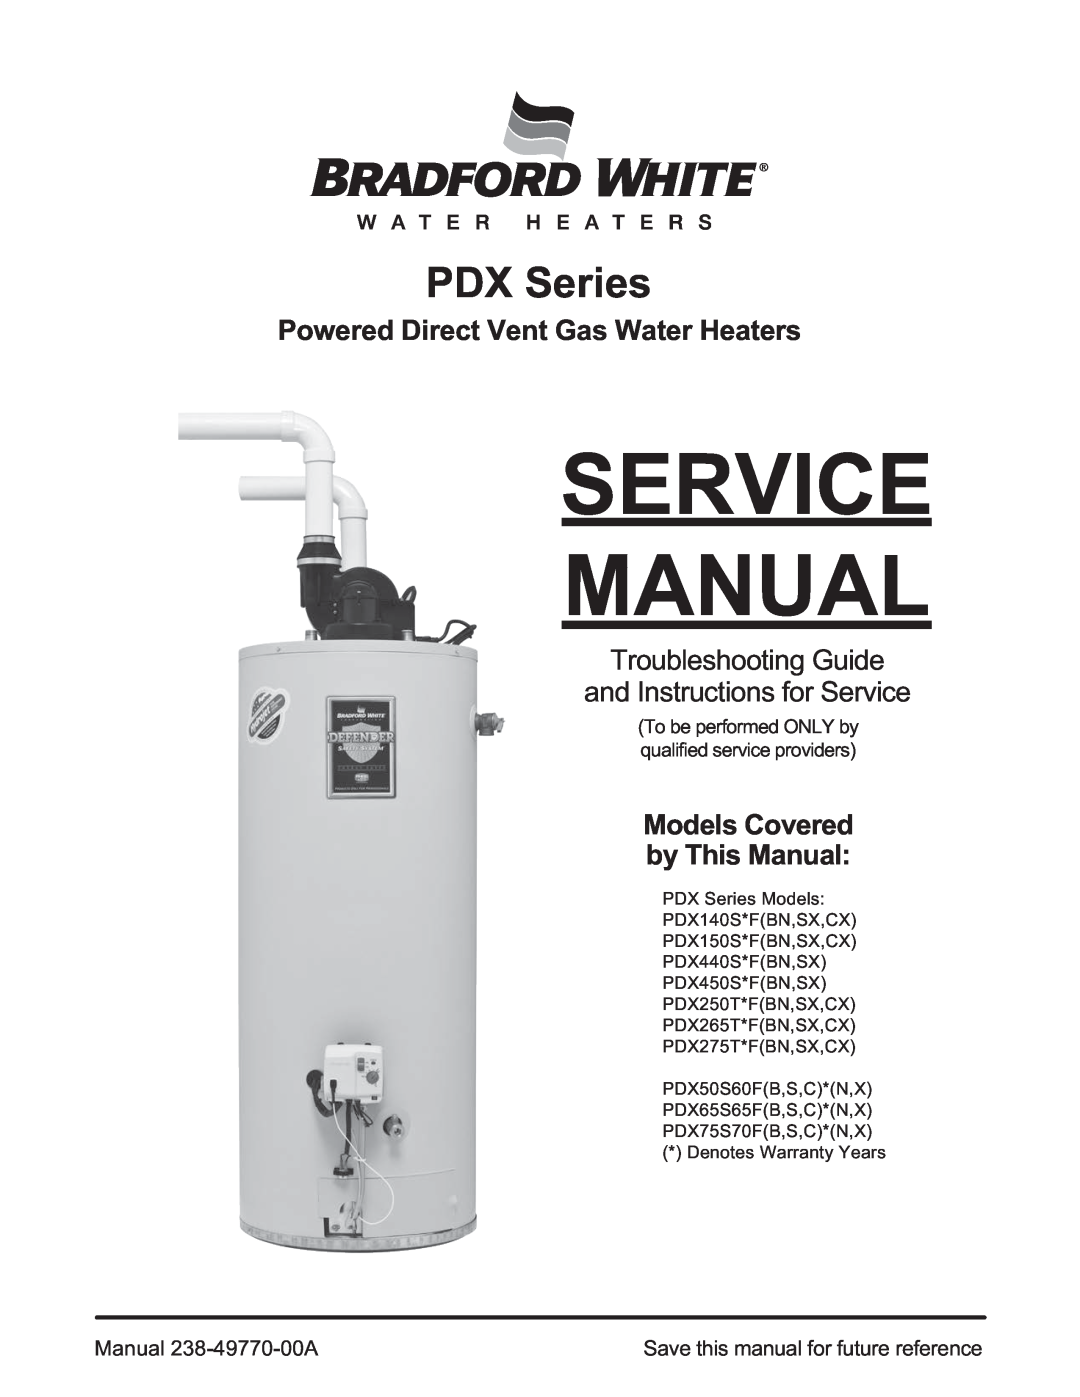 Honeywell PDX65S65F(B,S,C)*(N,X) service manual PDX Series, Powered Direct Vent Gas Water Heaters, Troubleshooting Guide 